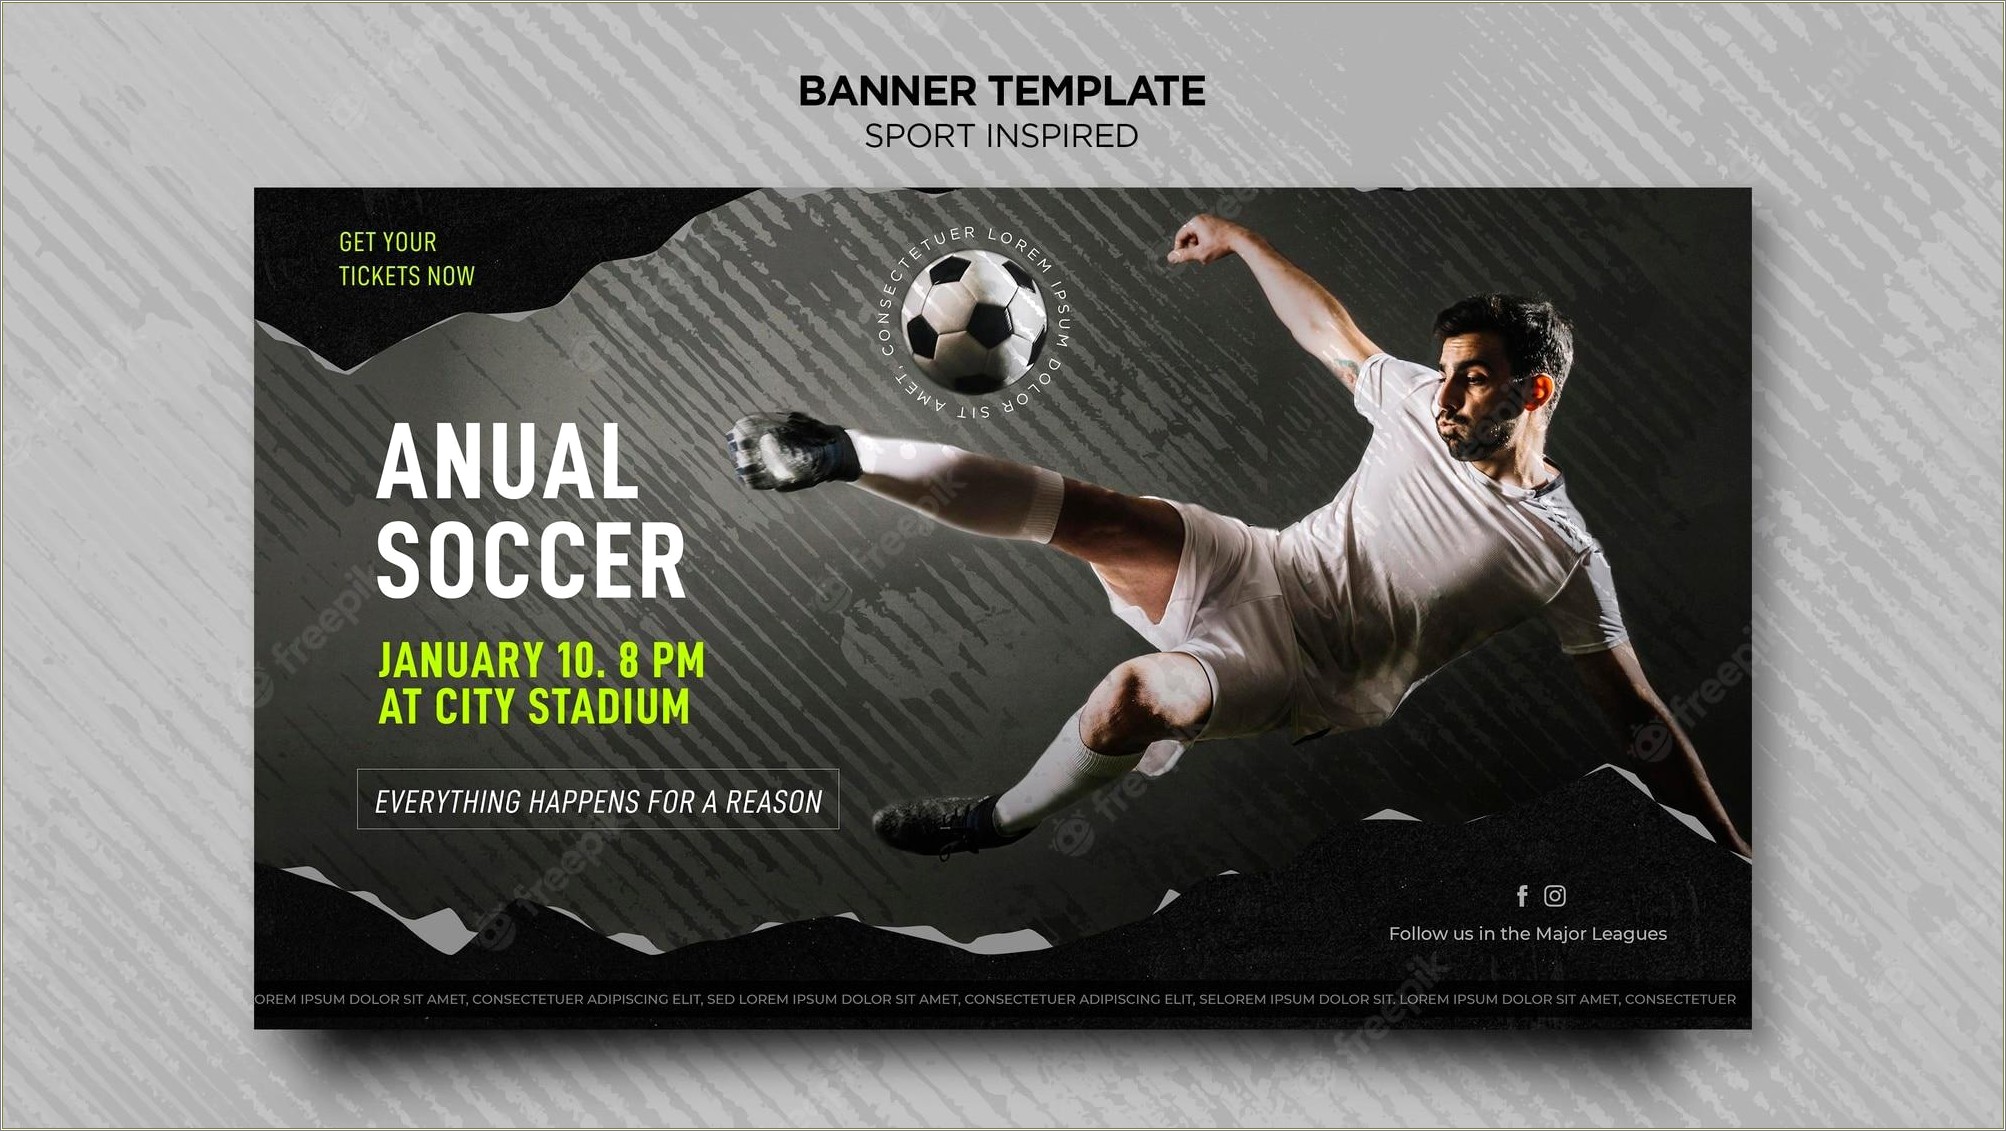 Free Download Sports Photo Templates For Photoshop Cs6